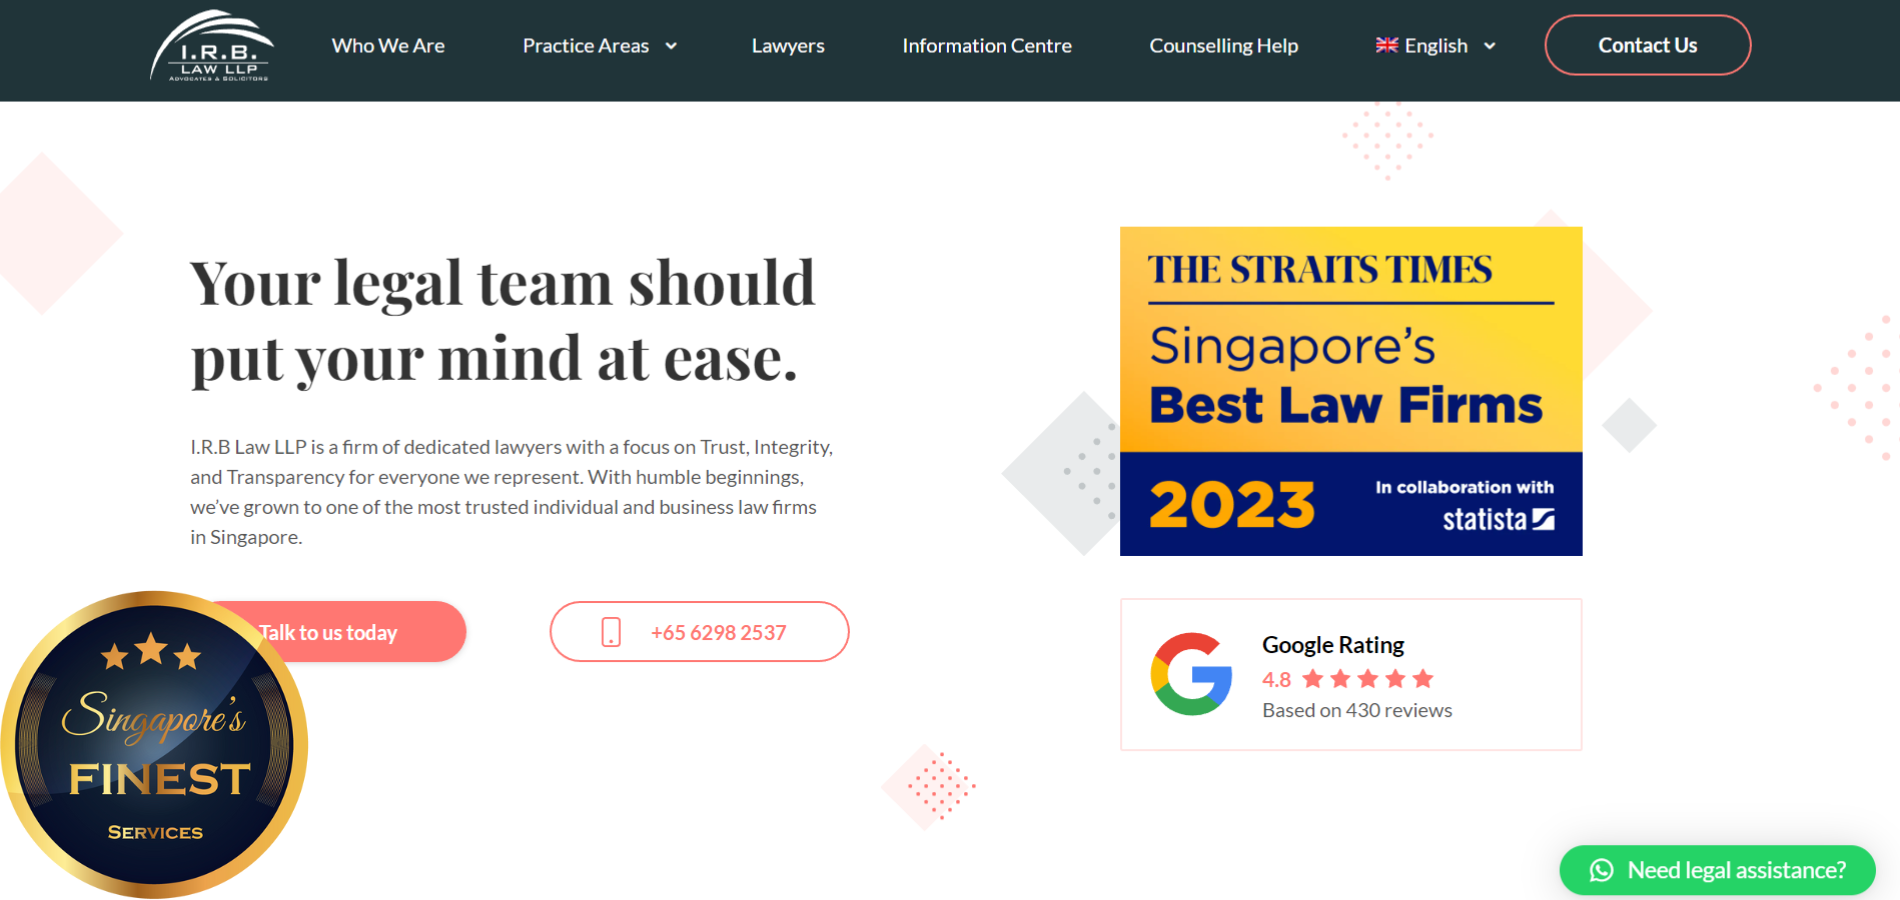 The Finest Law Firms in Singapore